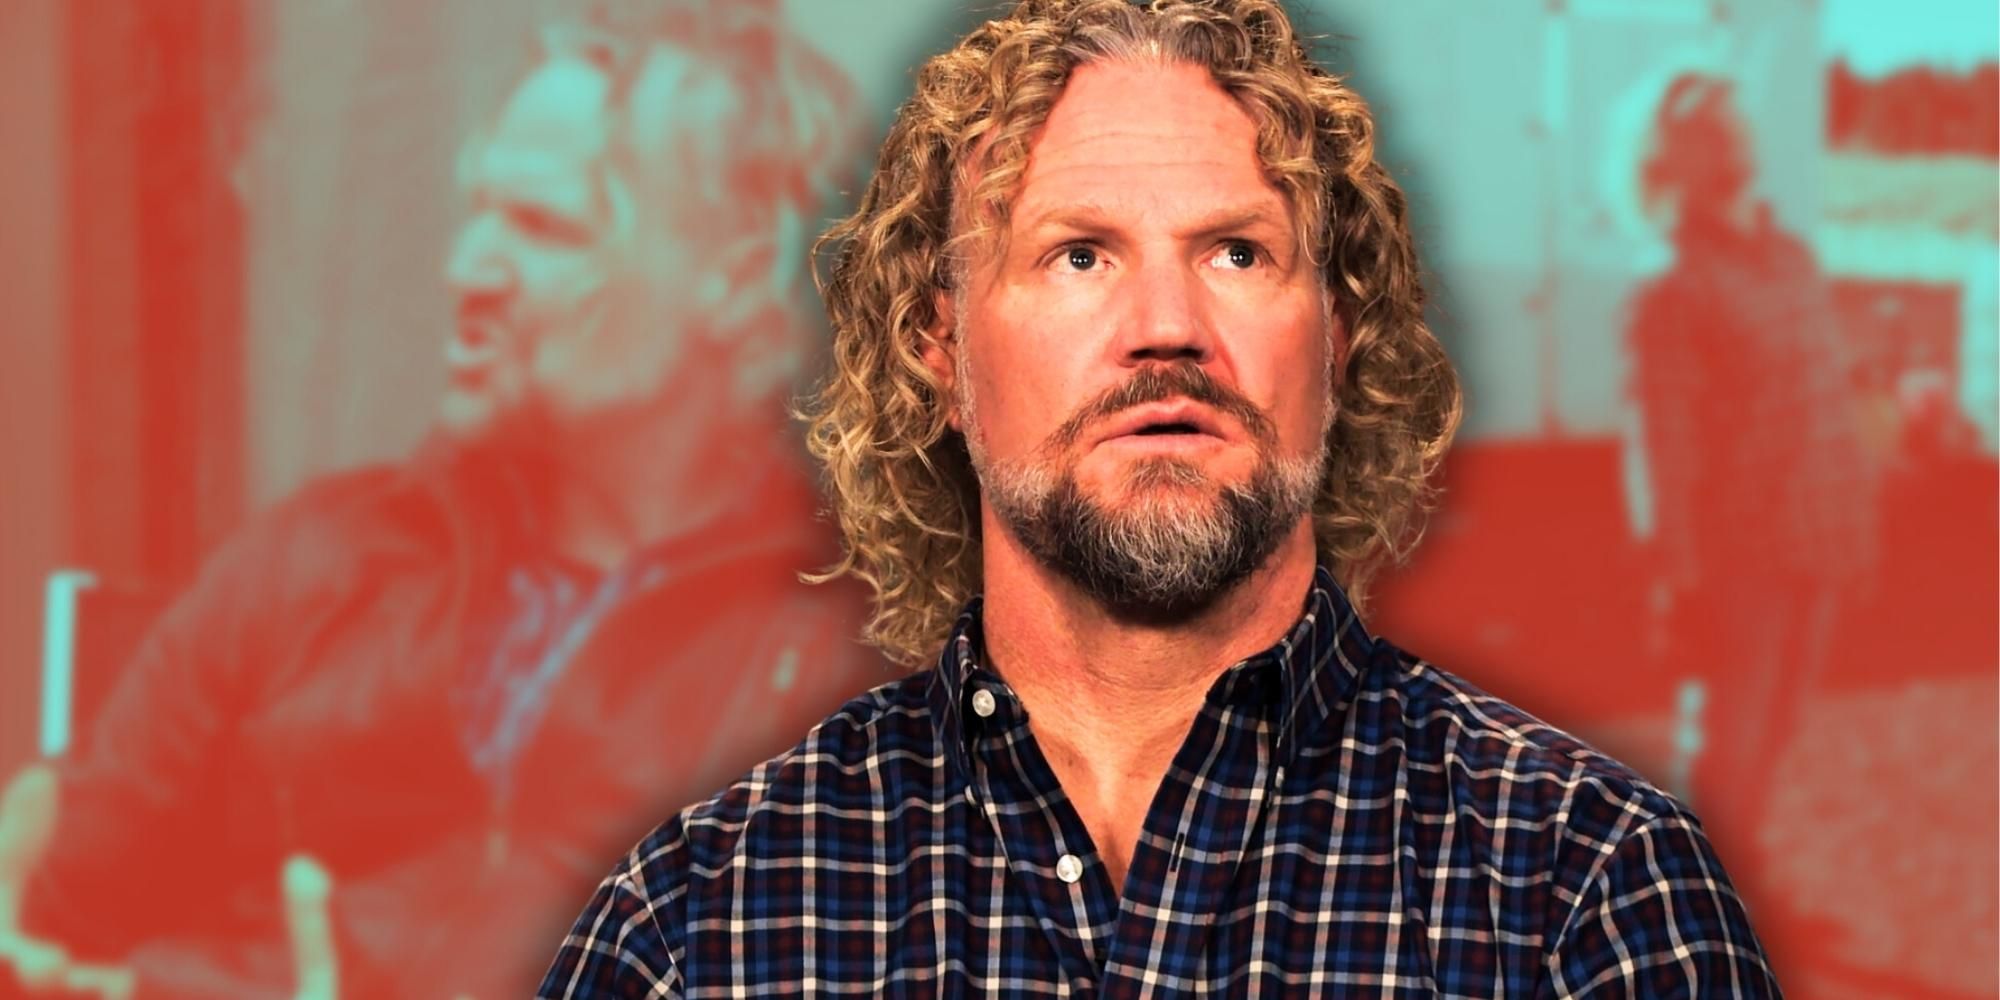 Sister Wives' Kody Brown montage wearing plaid shirt looking up red background